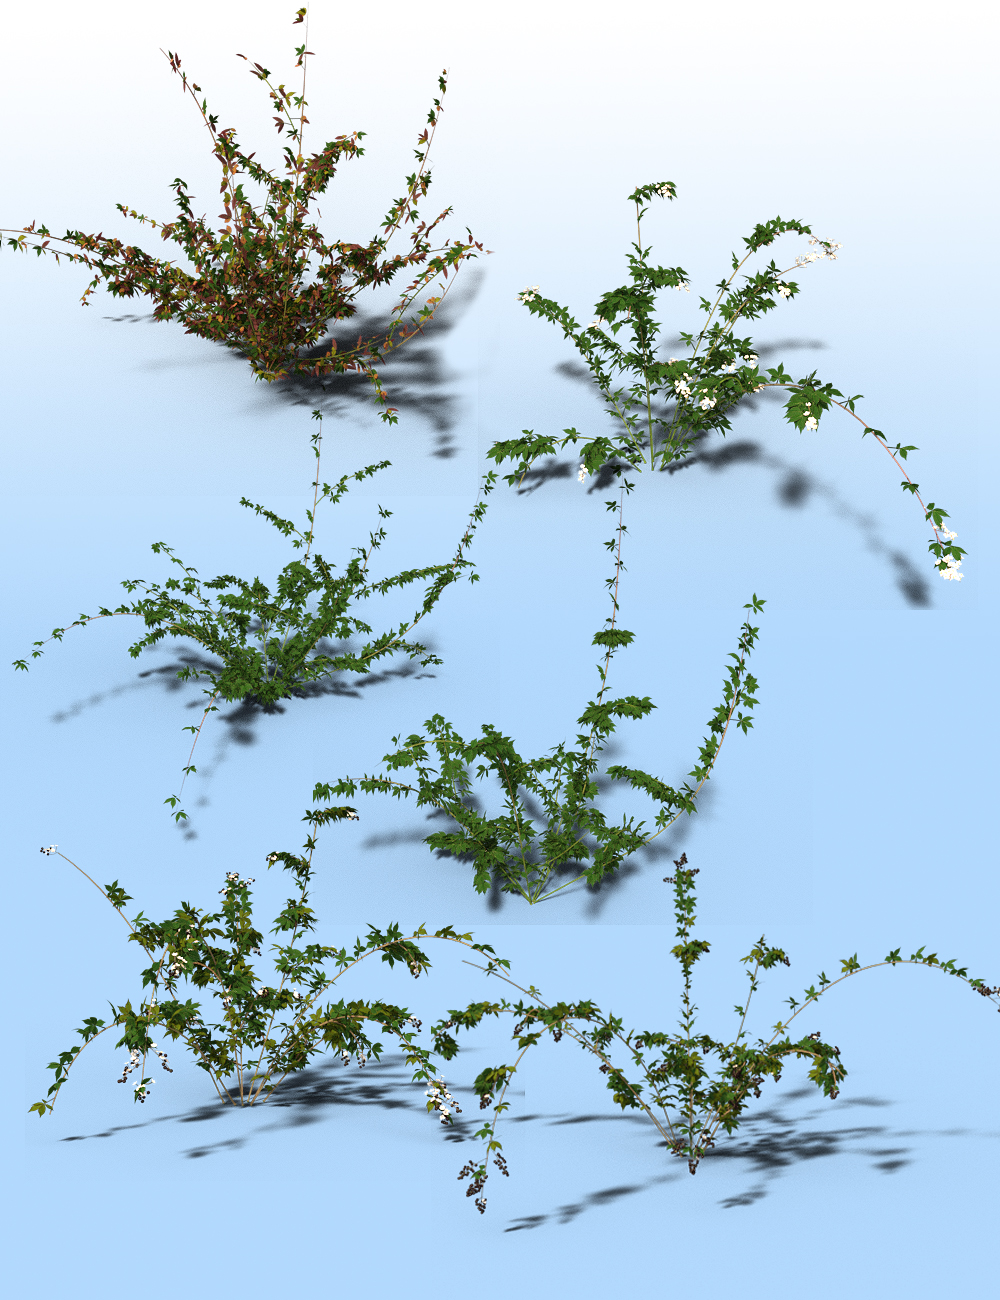 Bramble, Blackberry and Briar Plants for Daz Studio and Iray by: MartinJFrost, 3D Models by Daz 3D